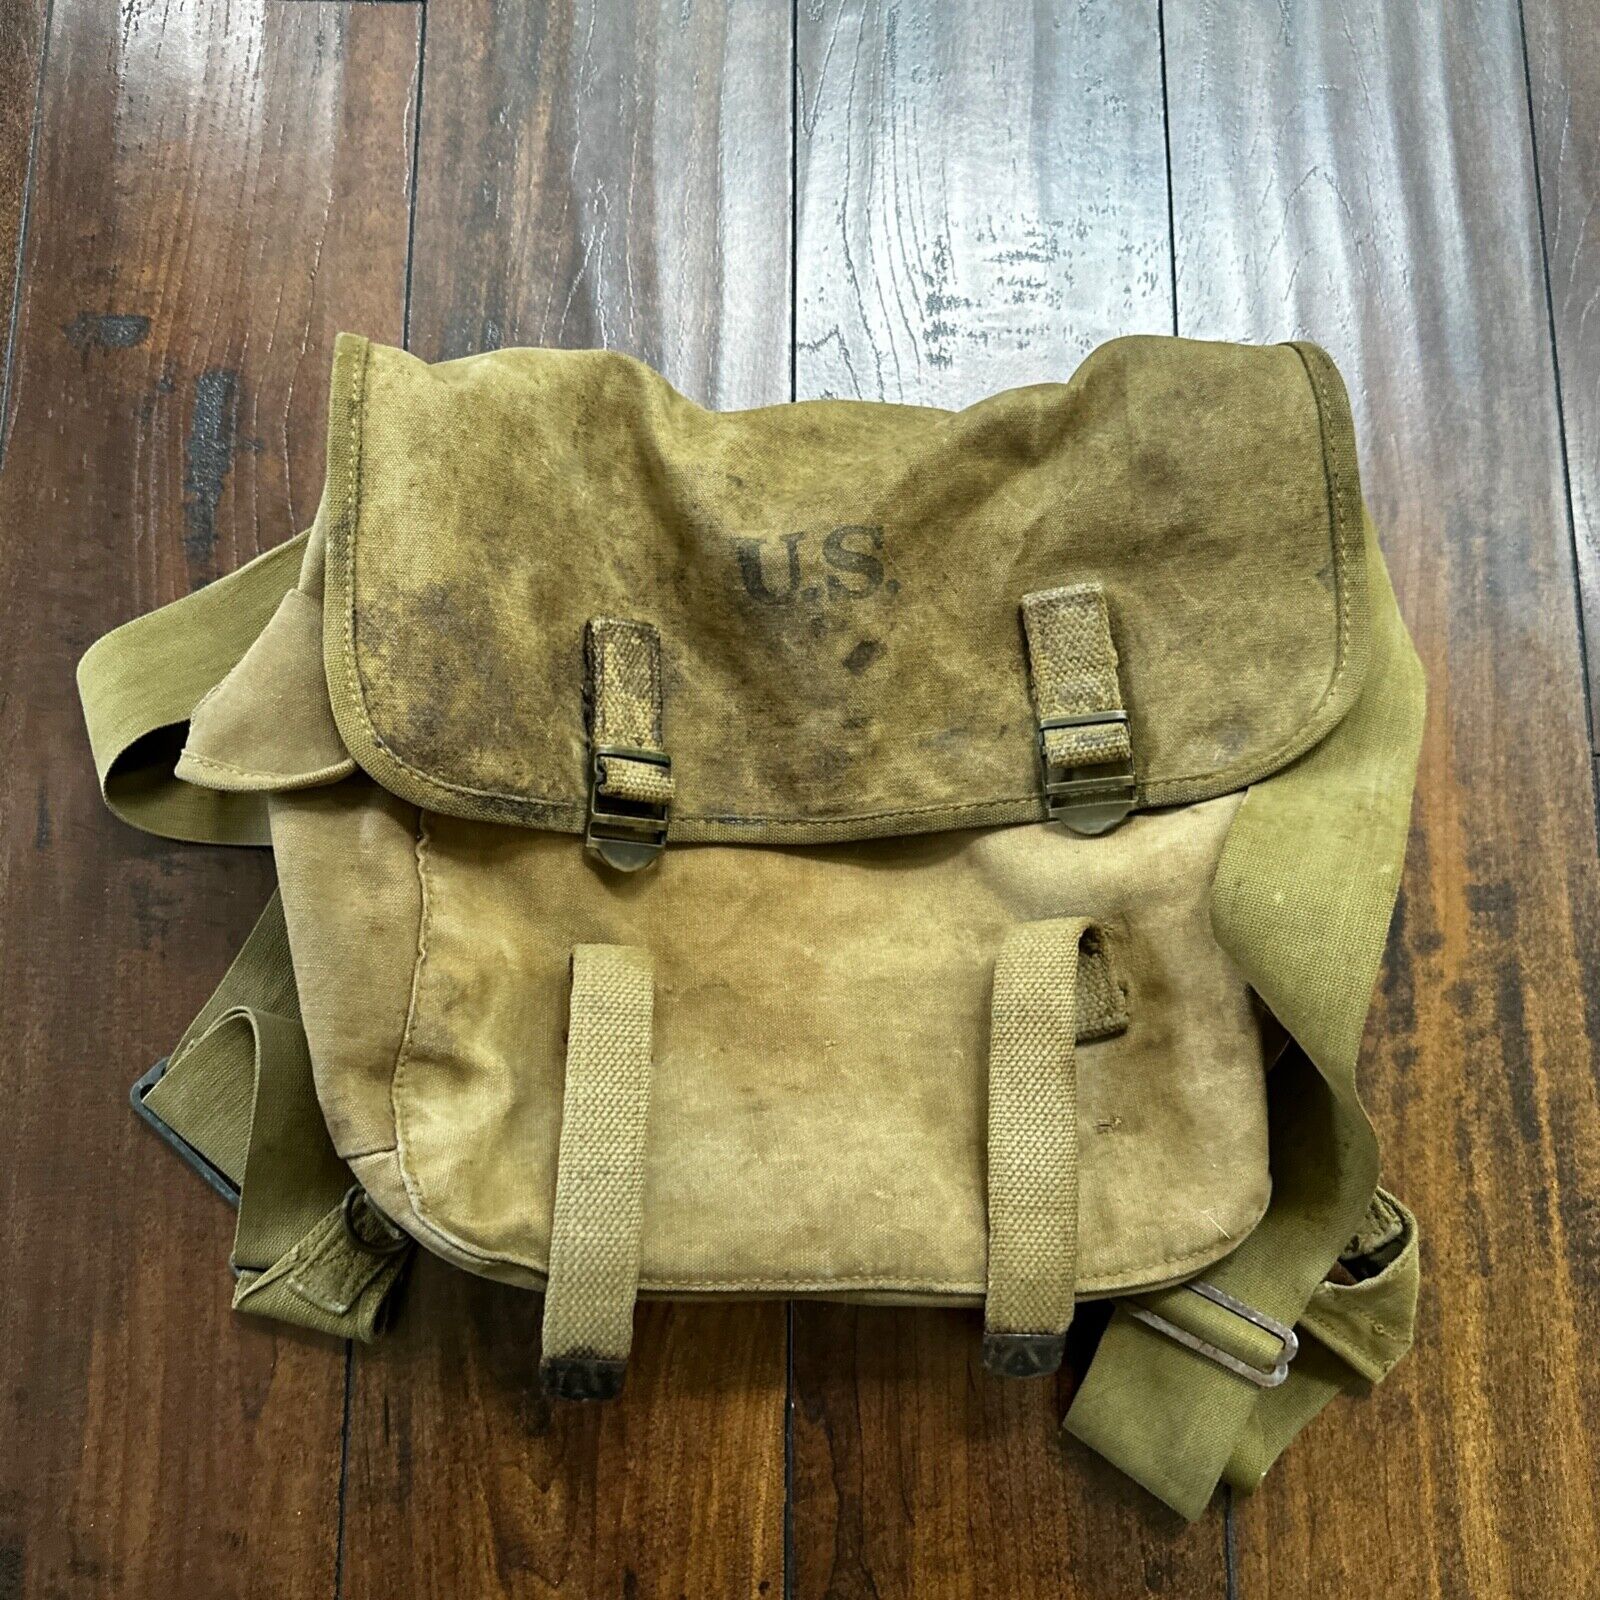 WW2 WWII US ARMY M1936 Musette Field Bag Named & Marked Atlantic Products 1942